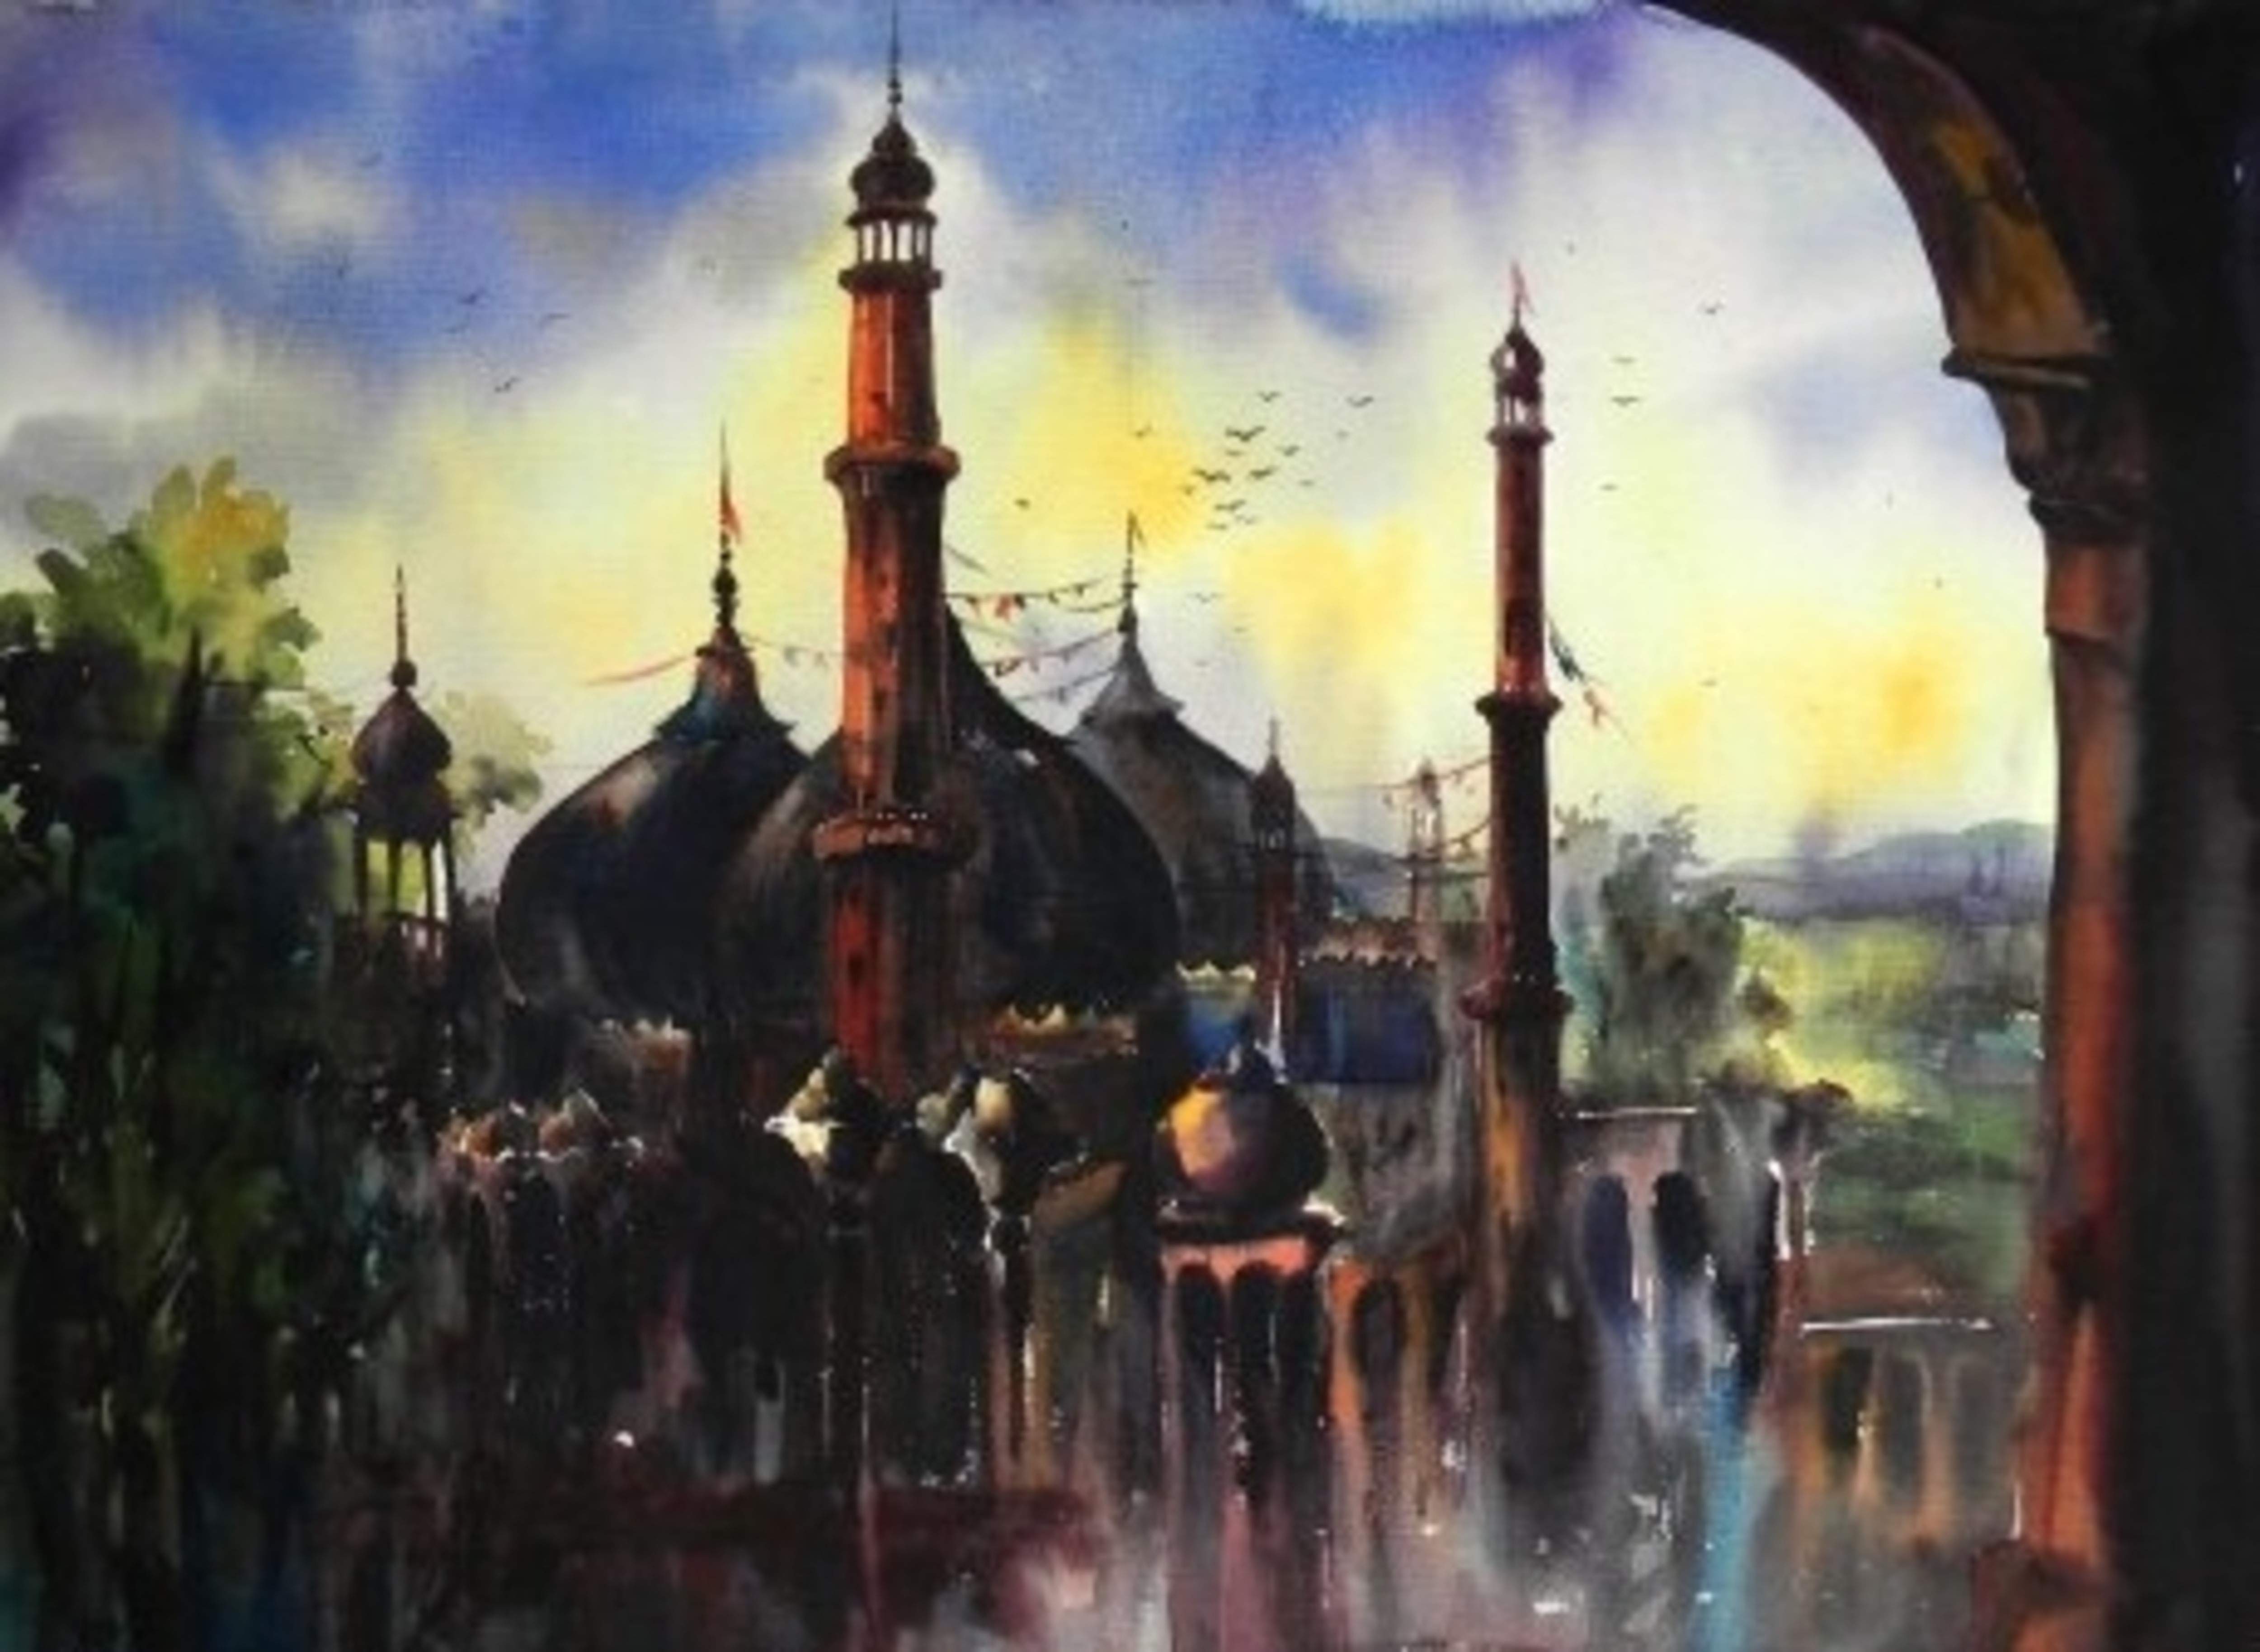 Old Lucknow Painting (source: https://huesnstrokes.com/home/584-old-lucknow-i.html)